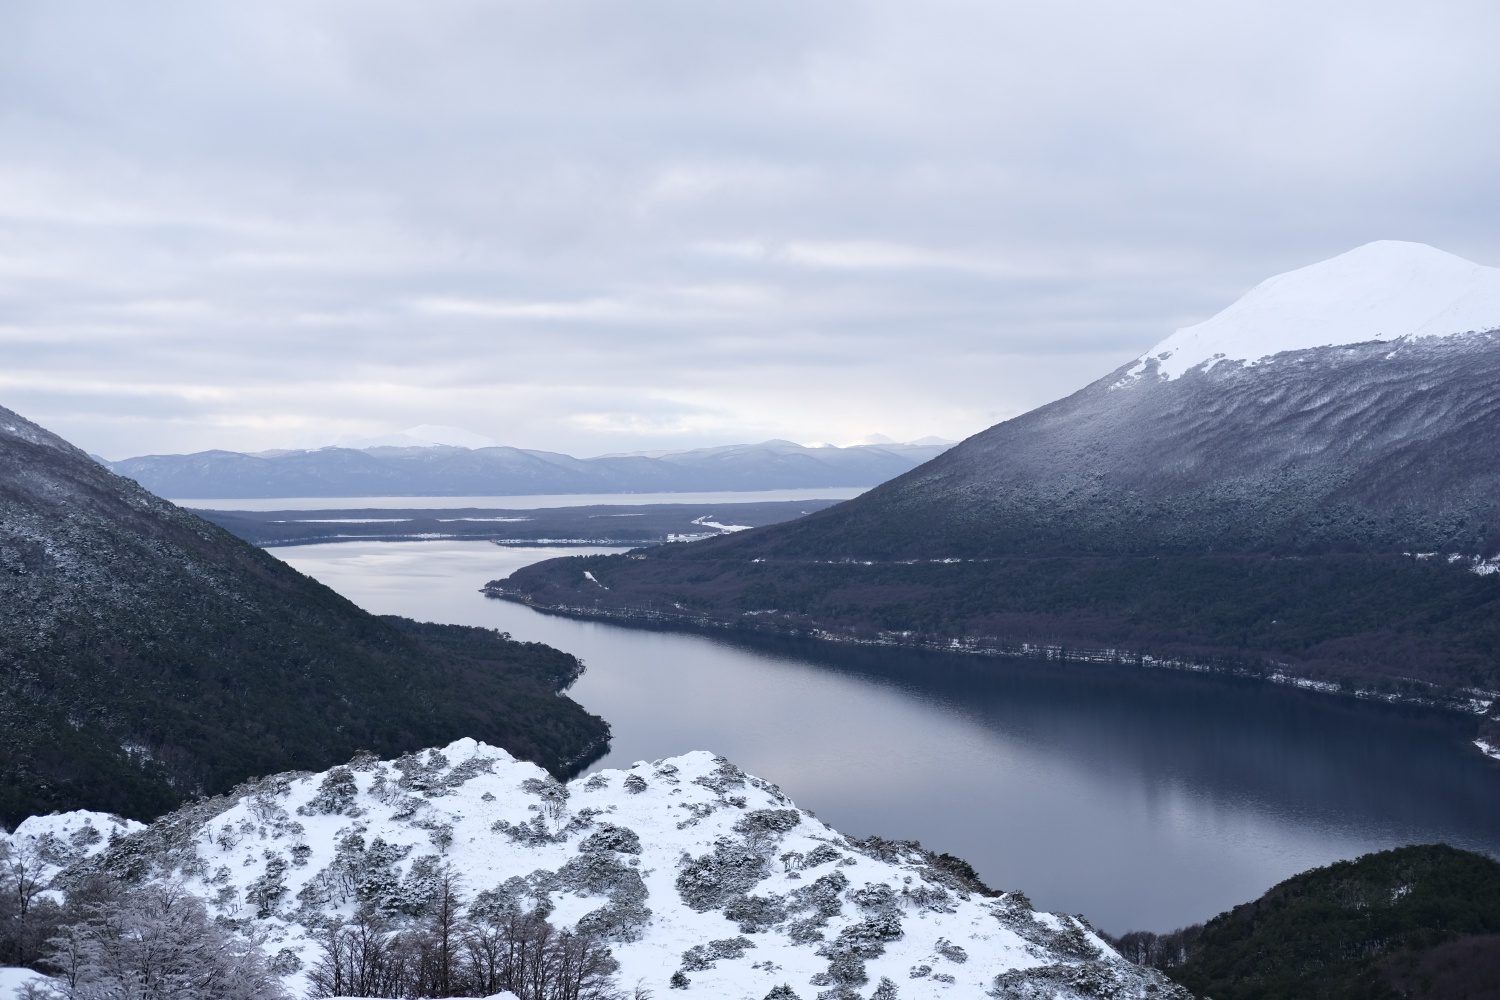 This is the view from the Paso Garibaldi, between Ushuaia and Tolhuin. You can see Fagnano Lake!